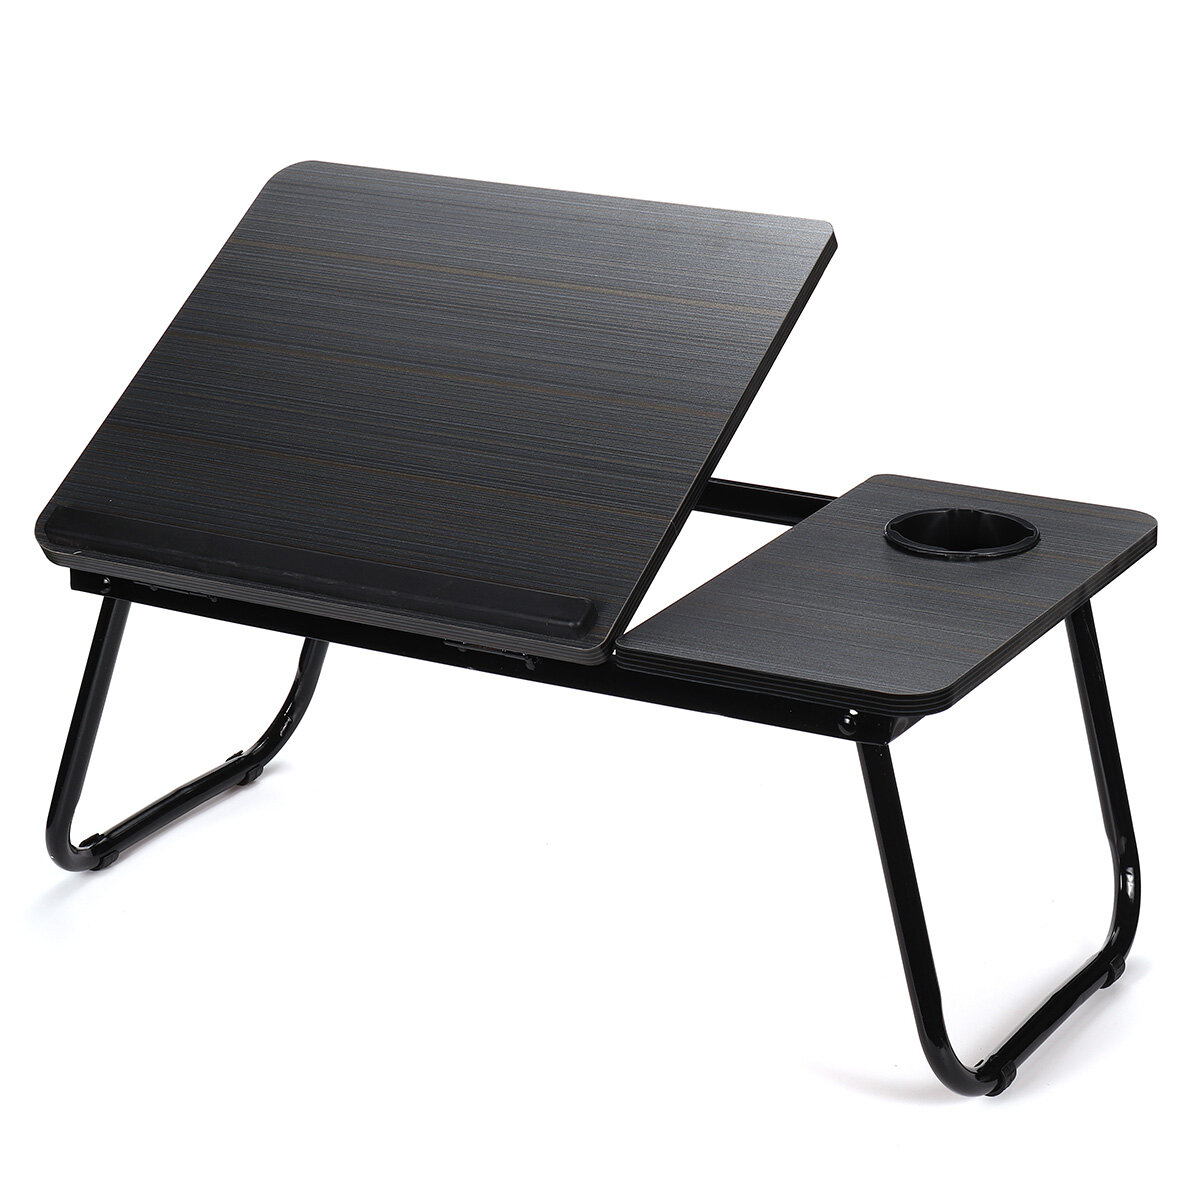 Image of Liftable Folding Computer Desk Laptop Stand 4 Heights Adjustable with Cup Holder Lap Bed Table Tray Breakfast Table